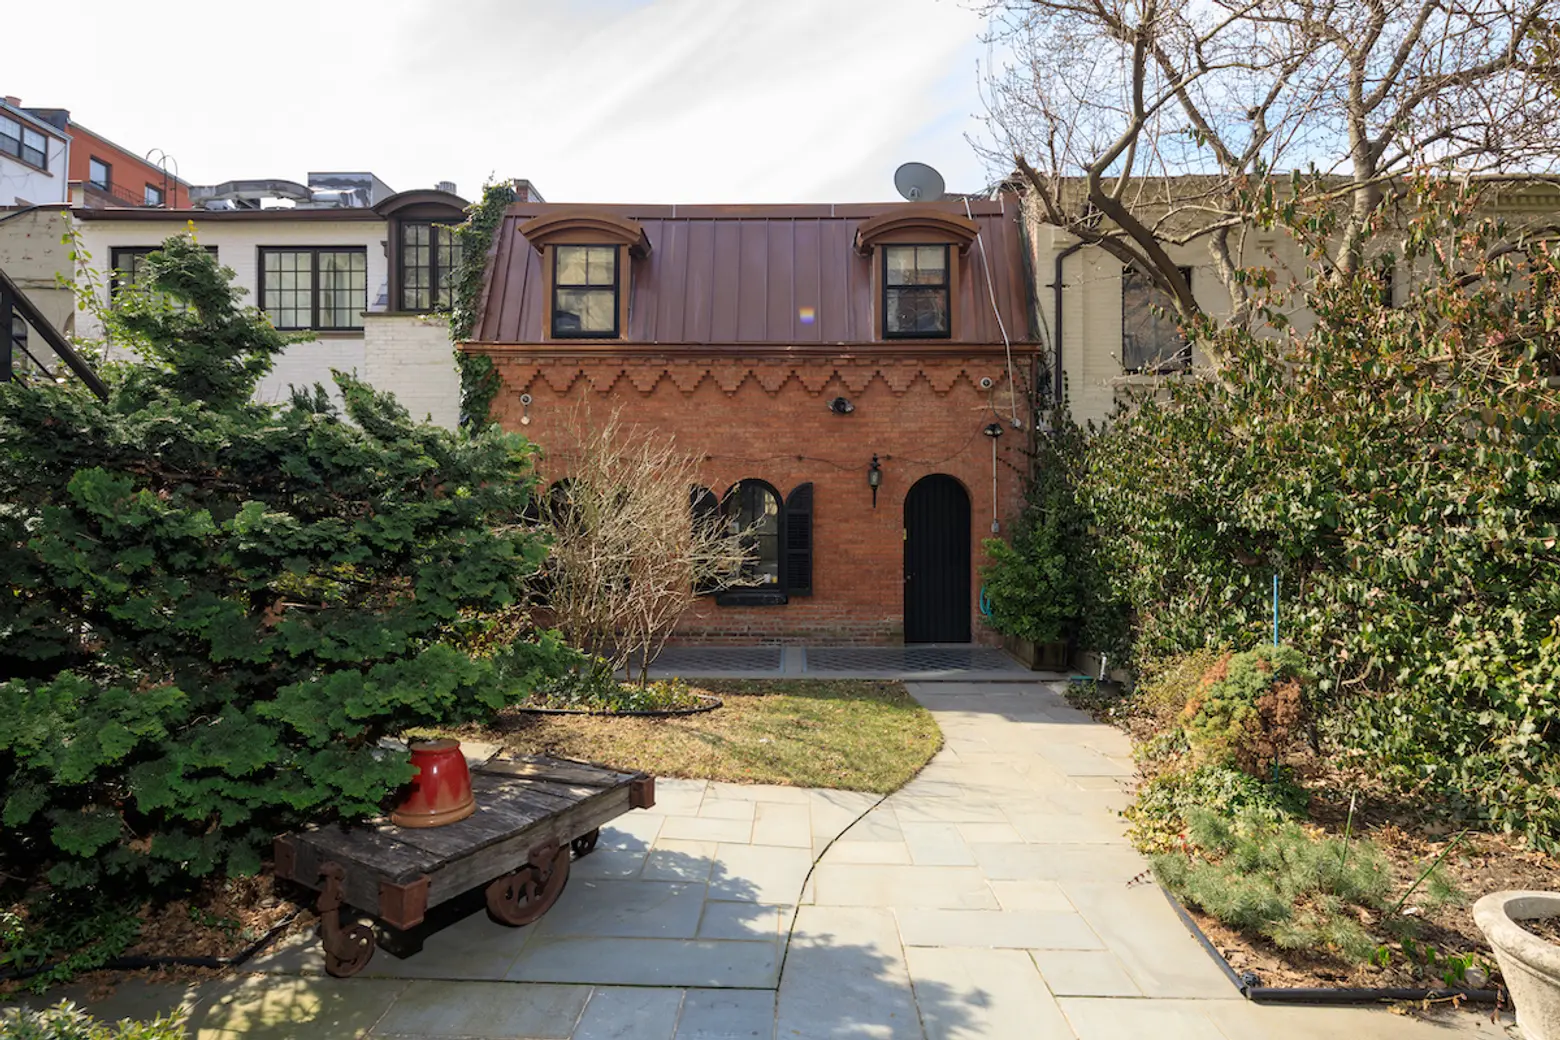 88 remsen street, brooklyn heights, most expensive, townhouses, cool listings